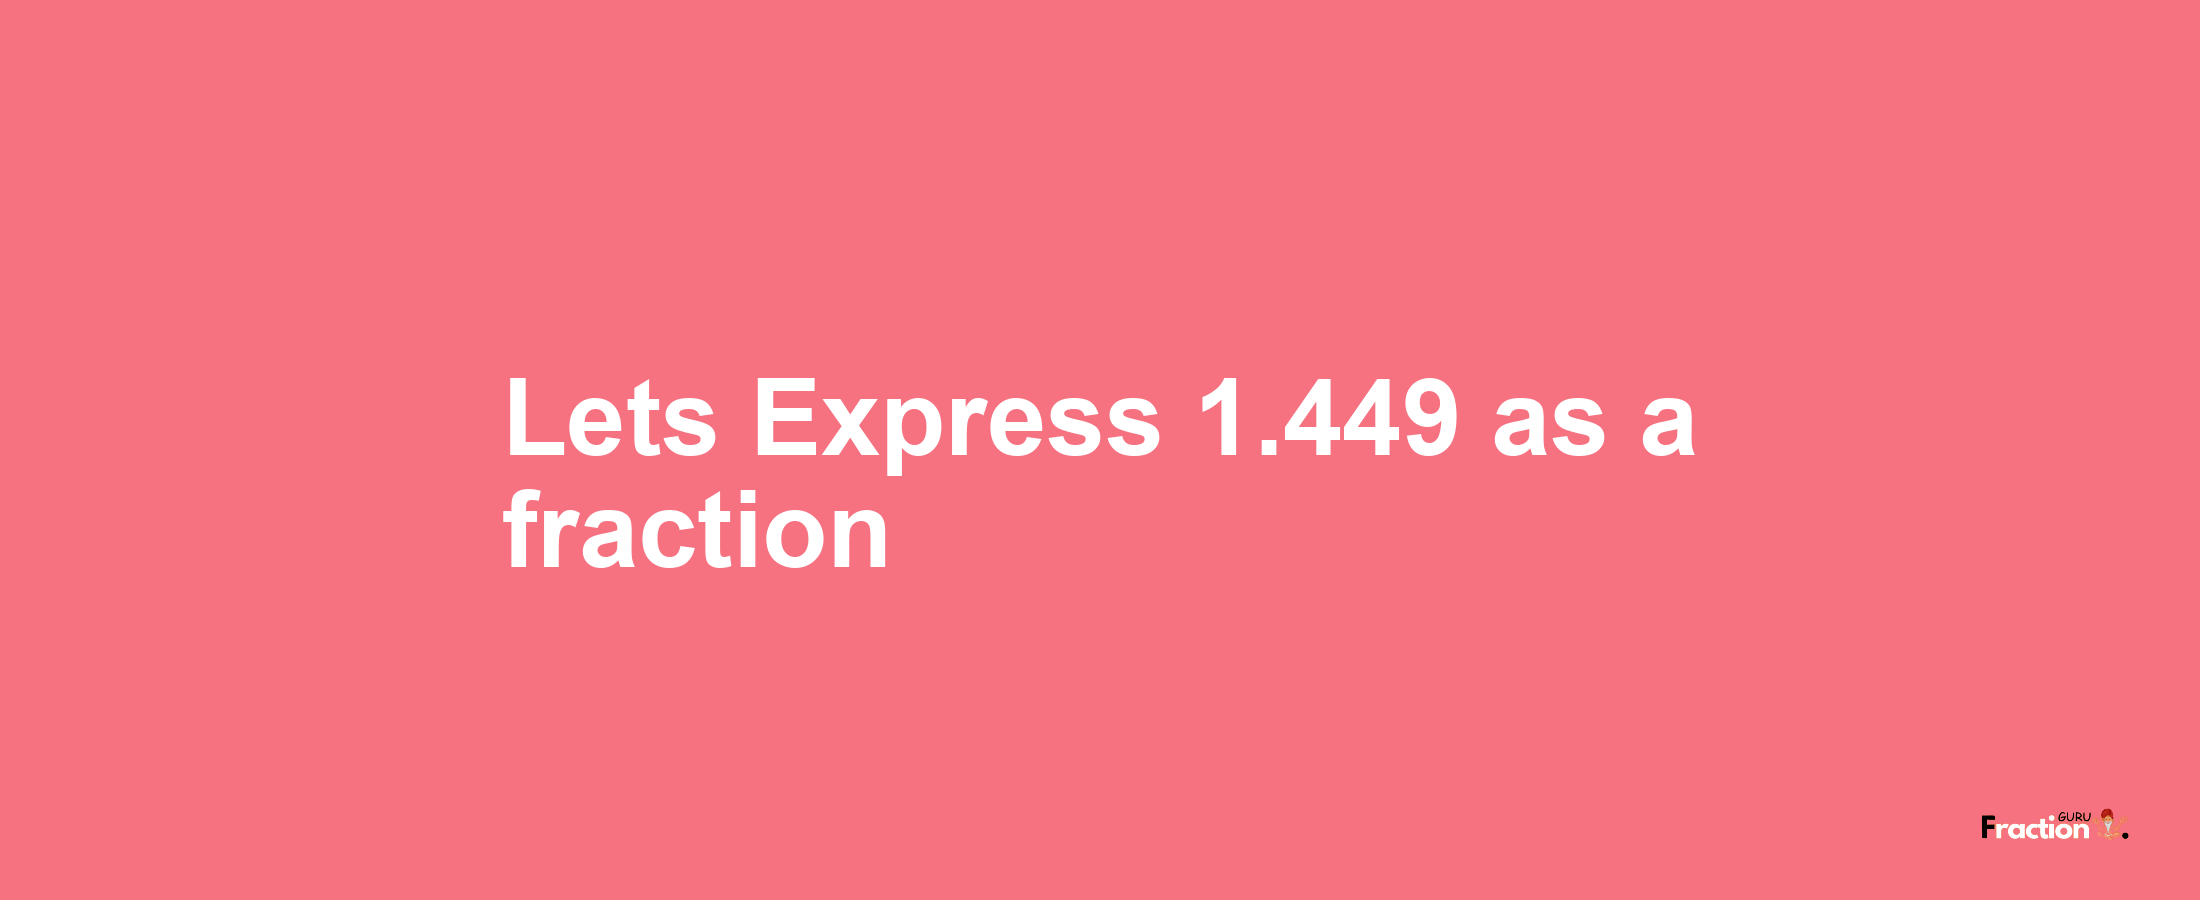 Lets Express 1.449 as afraction